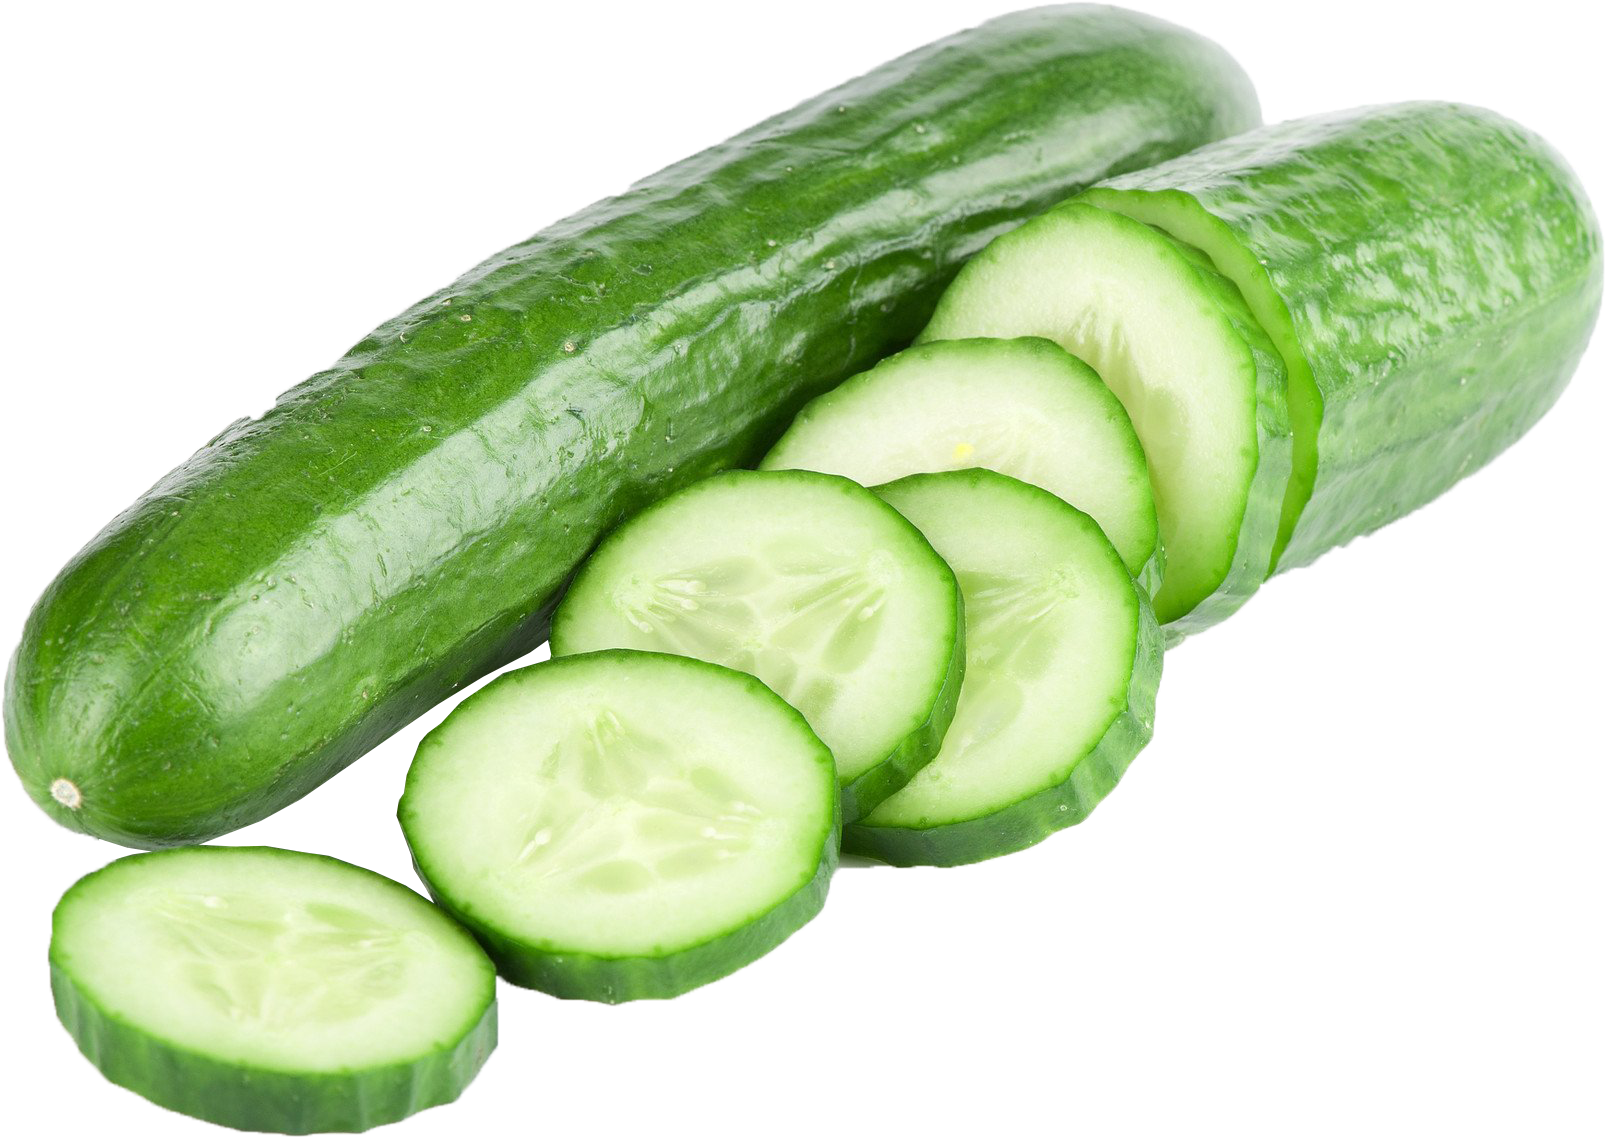 A Cucumber And Slices Of Cucumber